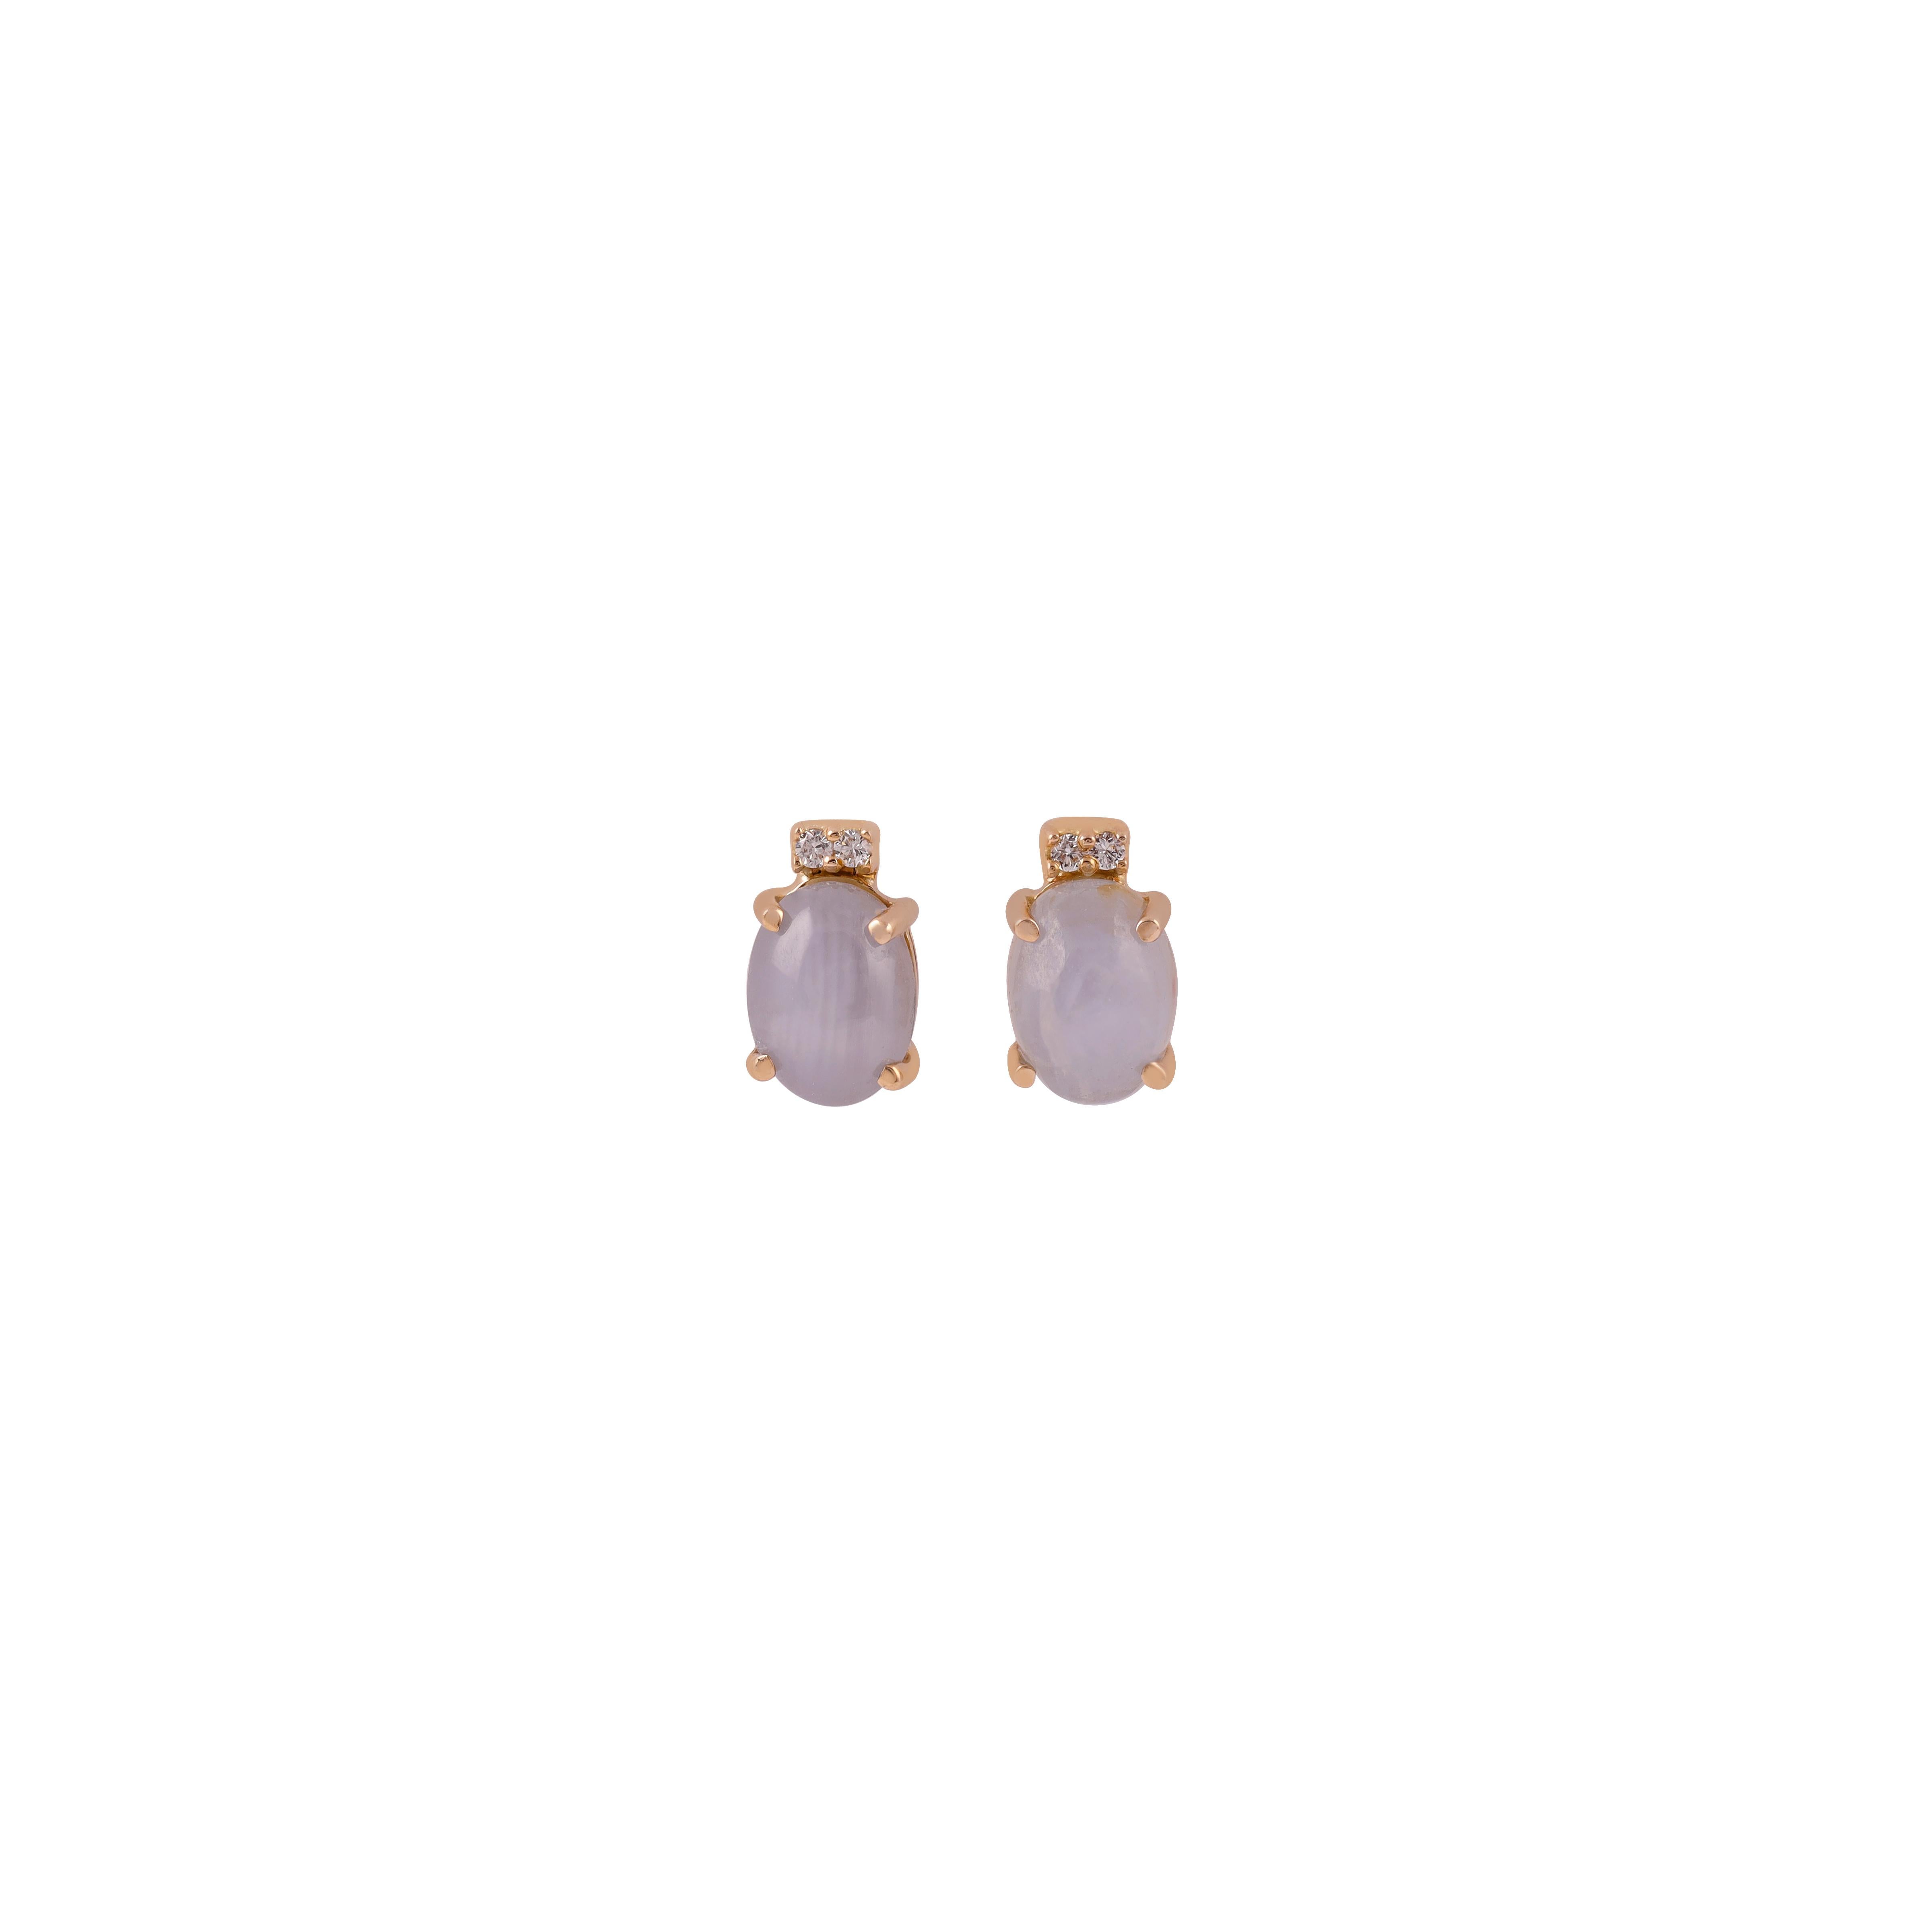 This is an elegant Stud earring pair with  6 Line Star Sapphire  & diamonds feature 1 pieces   6 Line Star Sapphire  weight 4.76 carats, 1pieces of  diamonds weight 0.04 carat , these earrings entirely made in 18K Yellow gold weight 2.41 grams.